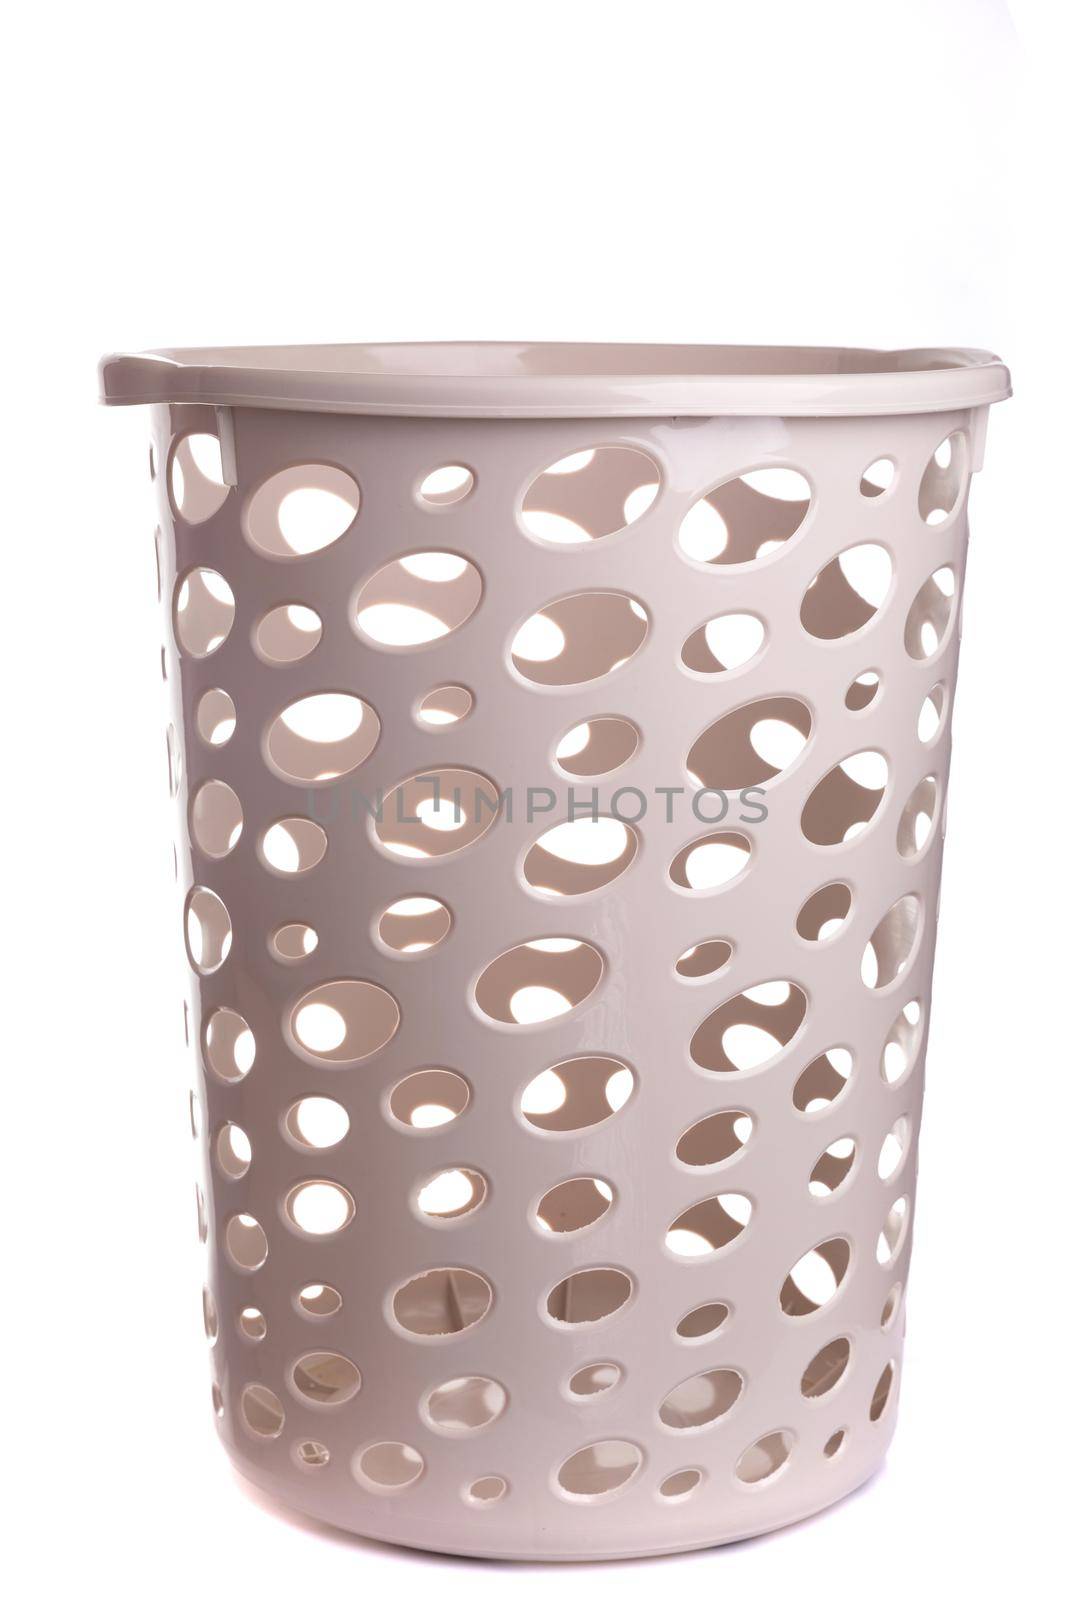 beige plastic empty basket for dirty laundry on white isolated background.